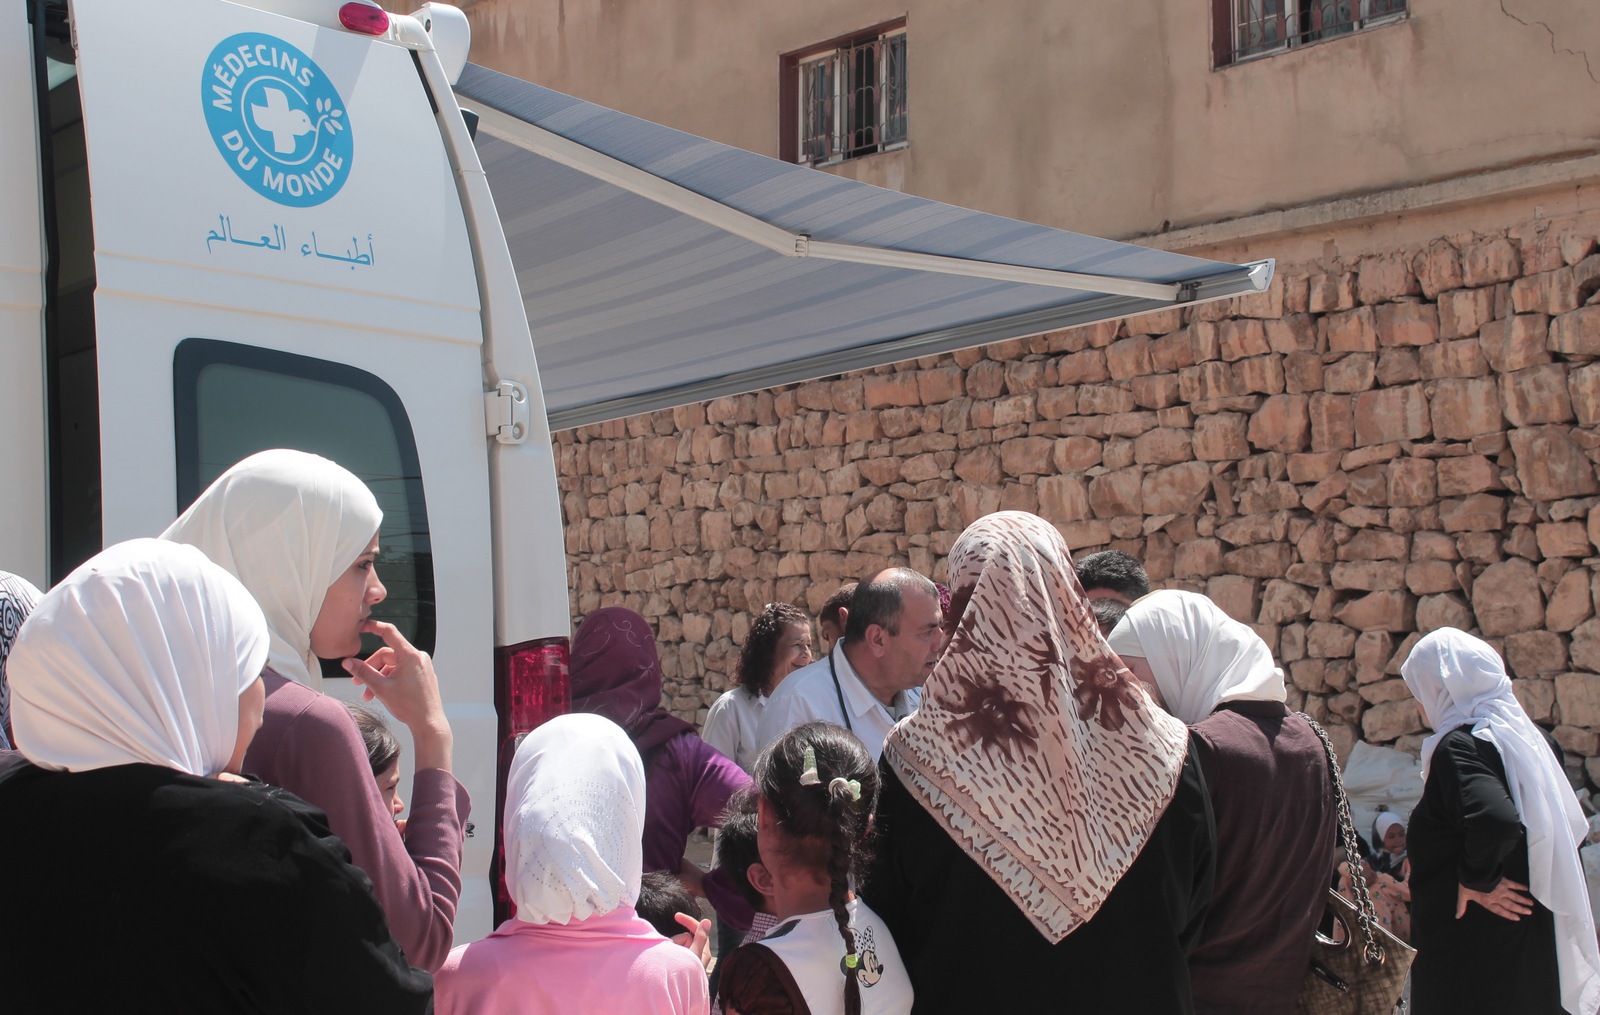 Caring through talking – An MdM psychologist reflects on her experience with Syrian refugees in Lebanon